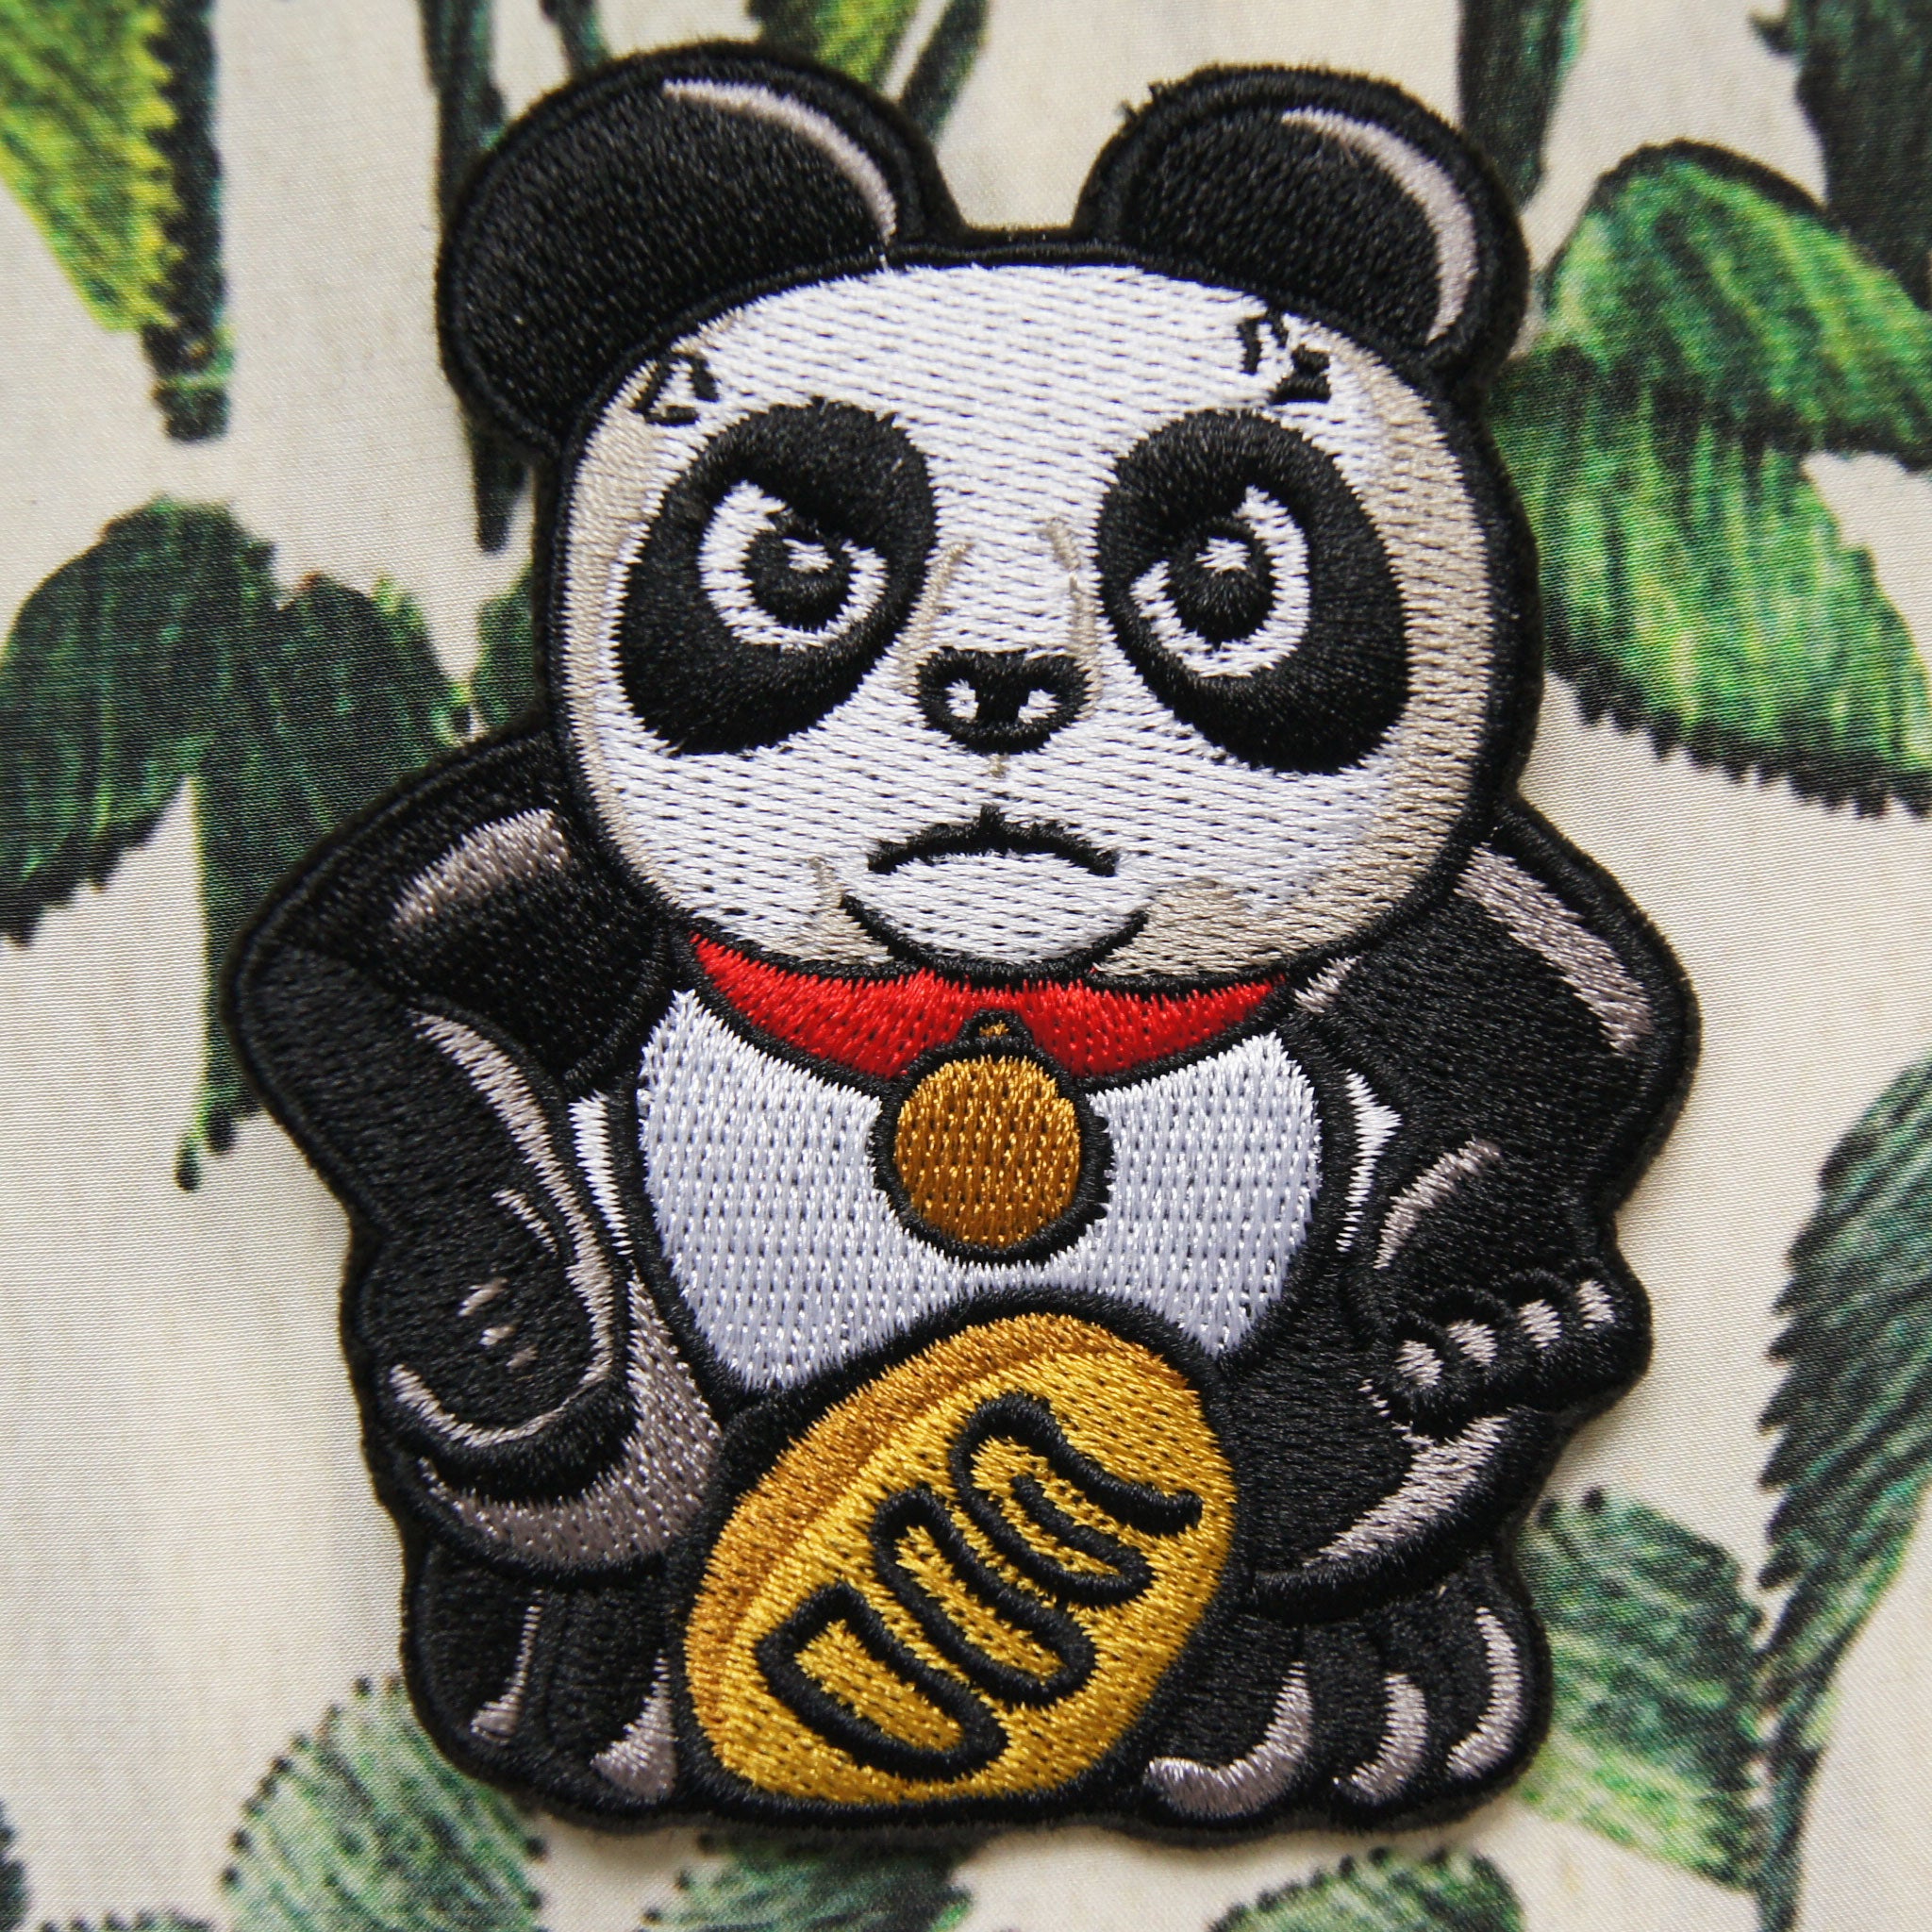 'Panda (Angry)' embroidered patch